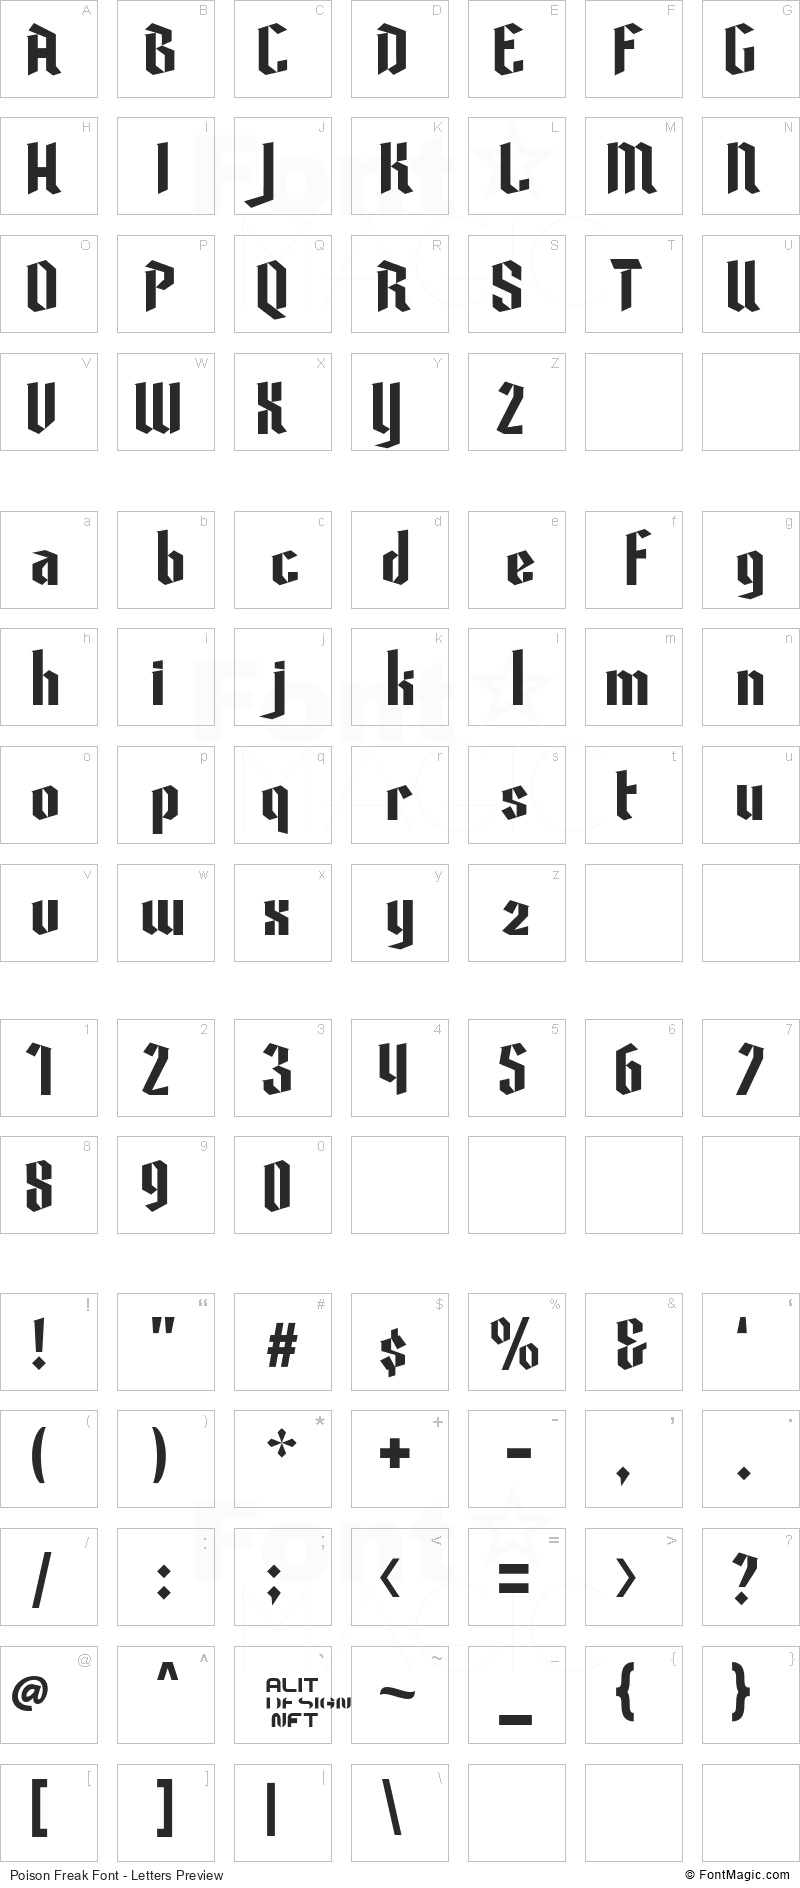 Poison Freak Font - All Latters Preview Chart